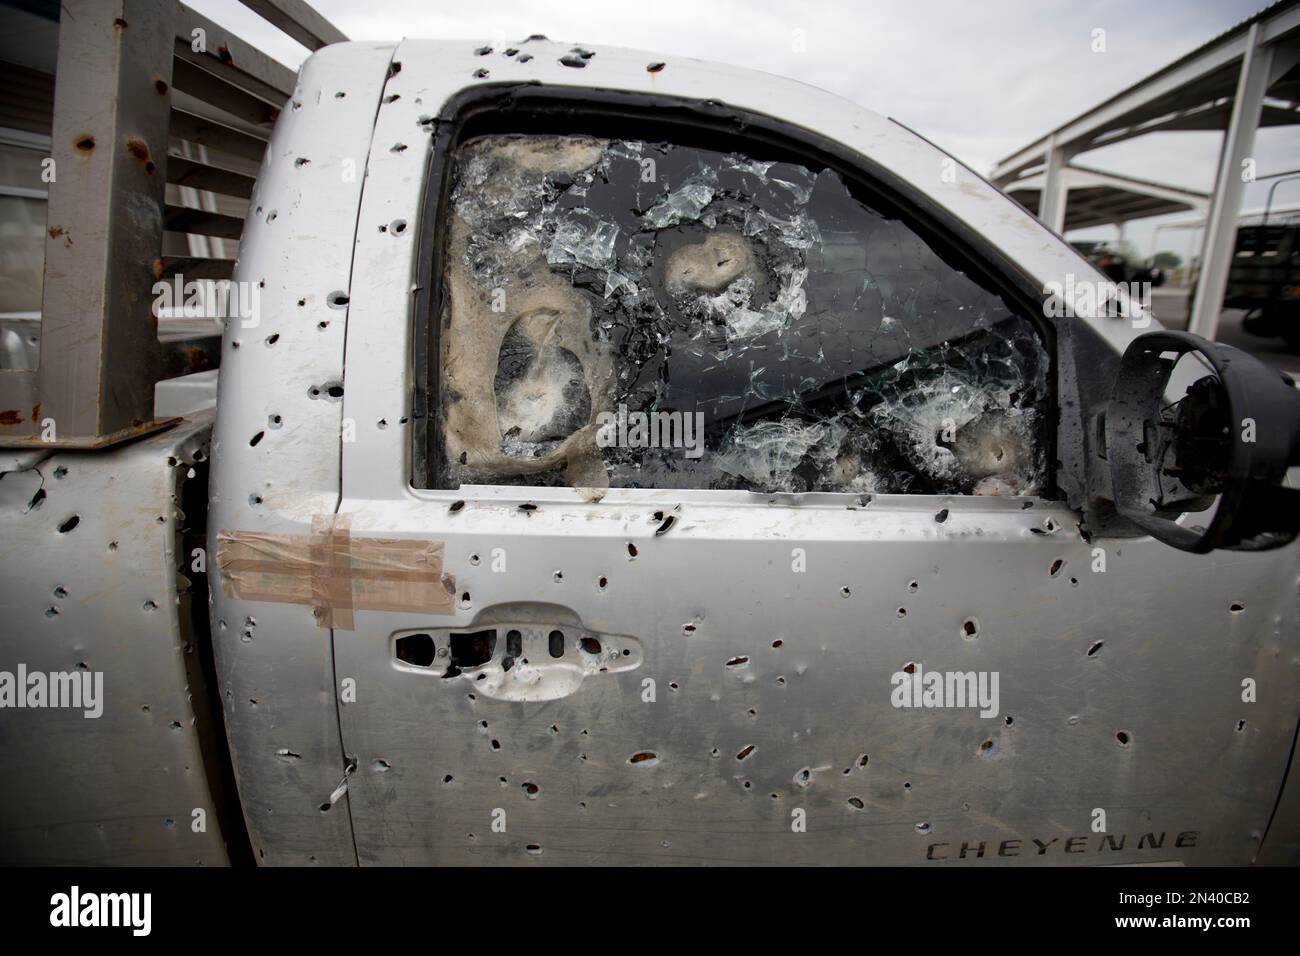 https://c8.alamy.com/comp/2N40CB2/in-this-sept-5-2014-photo-an-armored-truck-riddled-with-bullet-holes-sits-at-a-military-base-in-ciudad-mier-in-tamaulipas-state-mexico-the-military-says-they-confiscate-vehicles-that-are-abandoned-by-their-drivers-after-armed-fights-among-cartels-or-with-the-military-so-that-gangs-cannot-reuse-vehicles-parts-the-energy-reform-wont-be-viable-if-we-arent-successful-in-solving-the-problem-of-crime-and-impunity-said-mexican-senator-david-penchyna-who-heads-the-senate-energy-commission-the-biggest-challenge-we-mexicans-have-and-i-say-it-without-shame-is-tamaulipas-ap-photo-2N40CB2.jpg